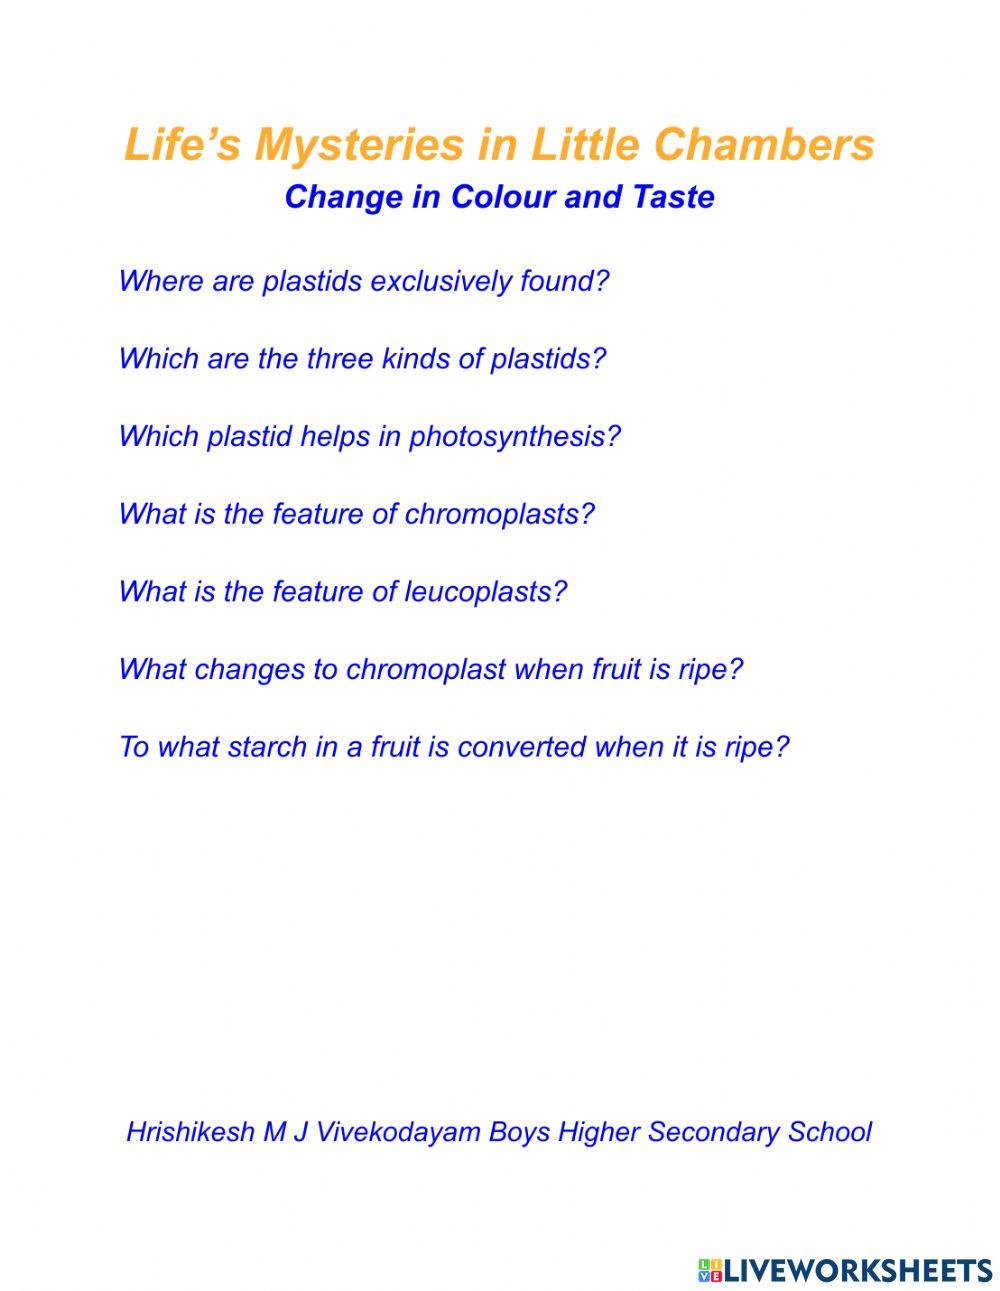 Change in taste and colour